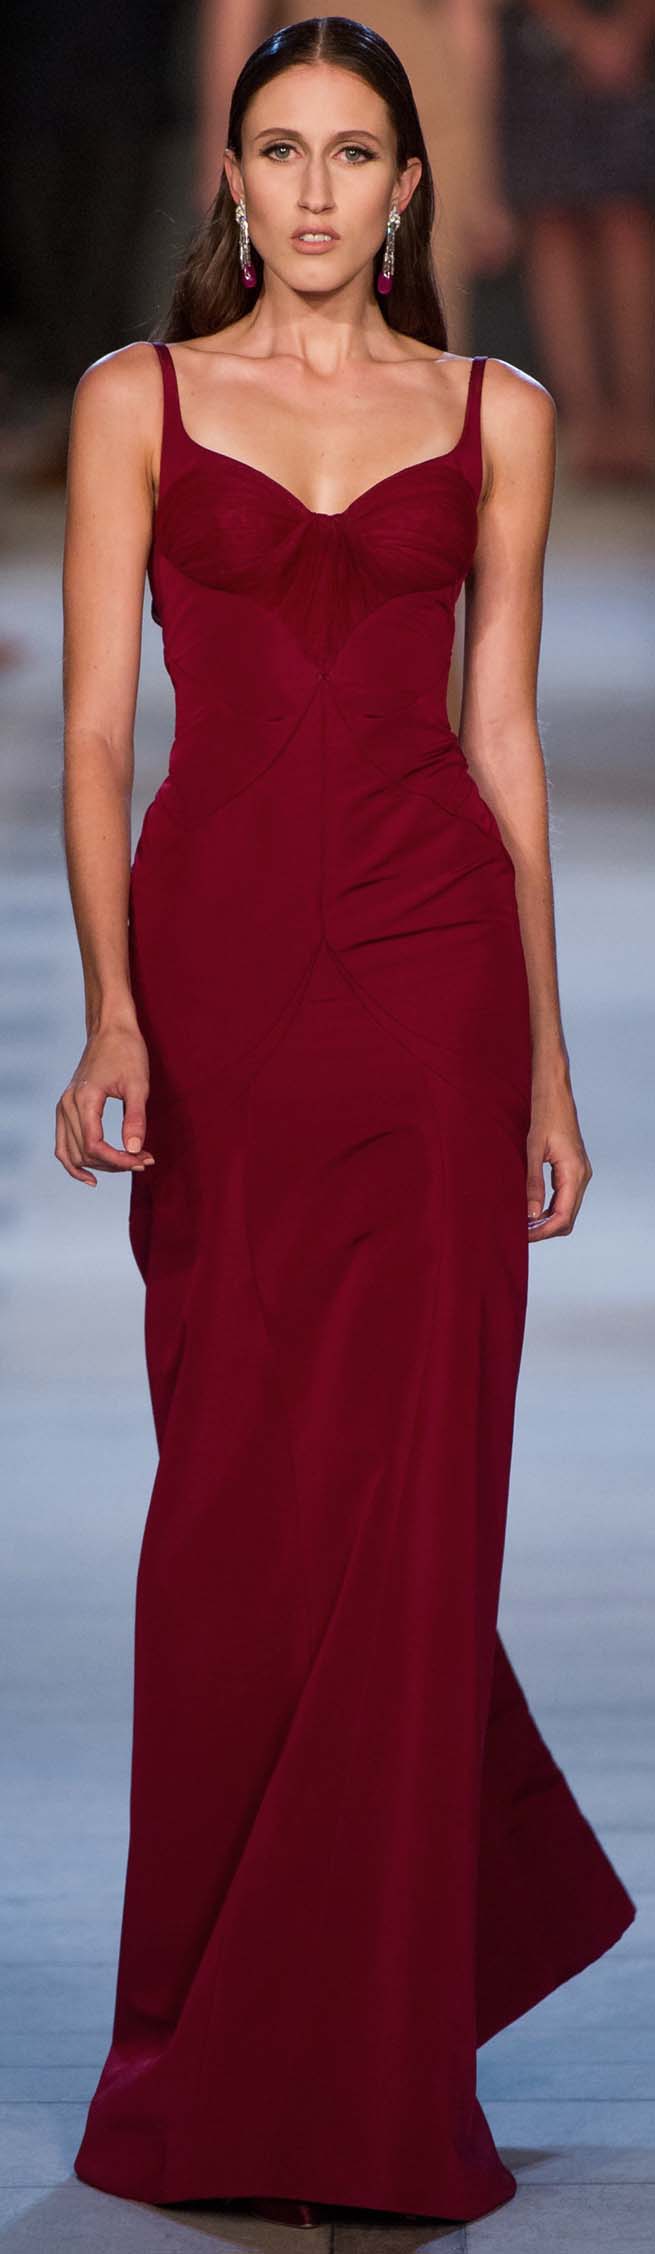 Zac Posen Spring Summer 2013 Ready-To-Wear Collection